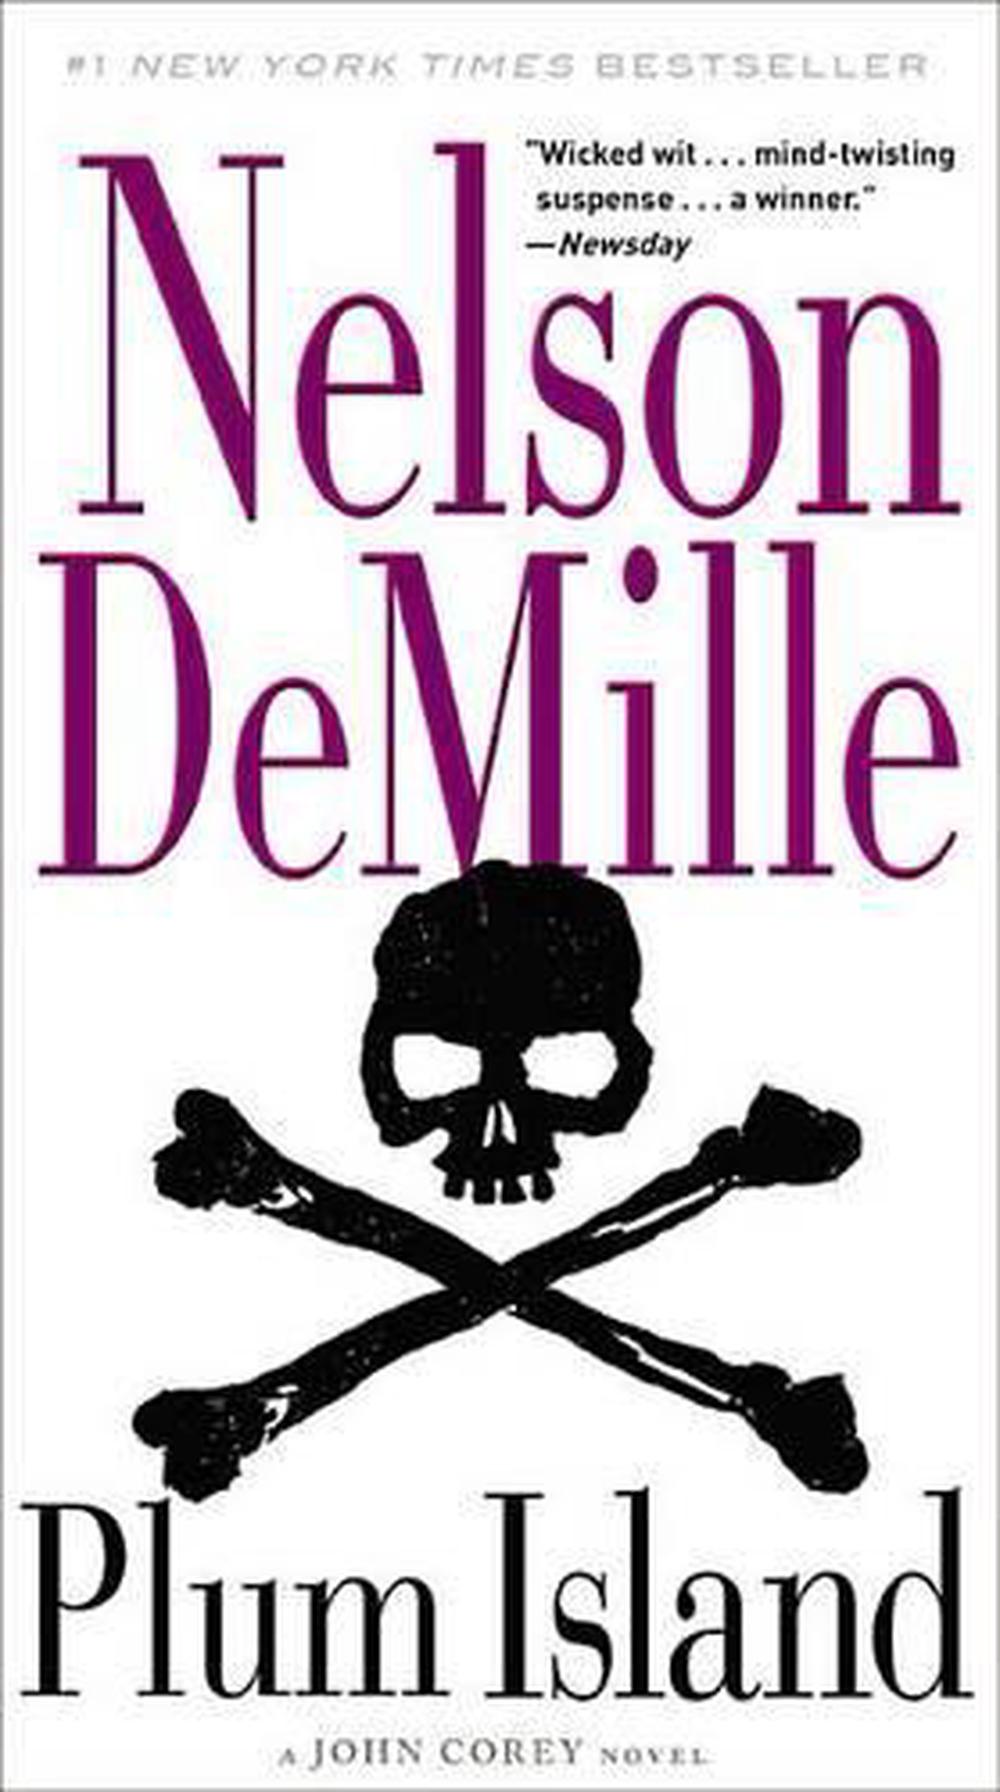 plum island by nelson demille